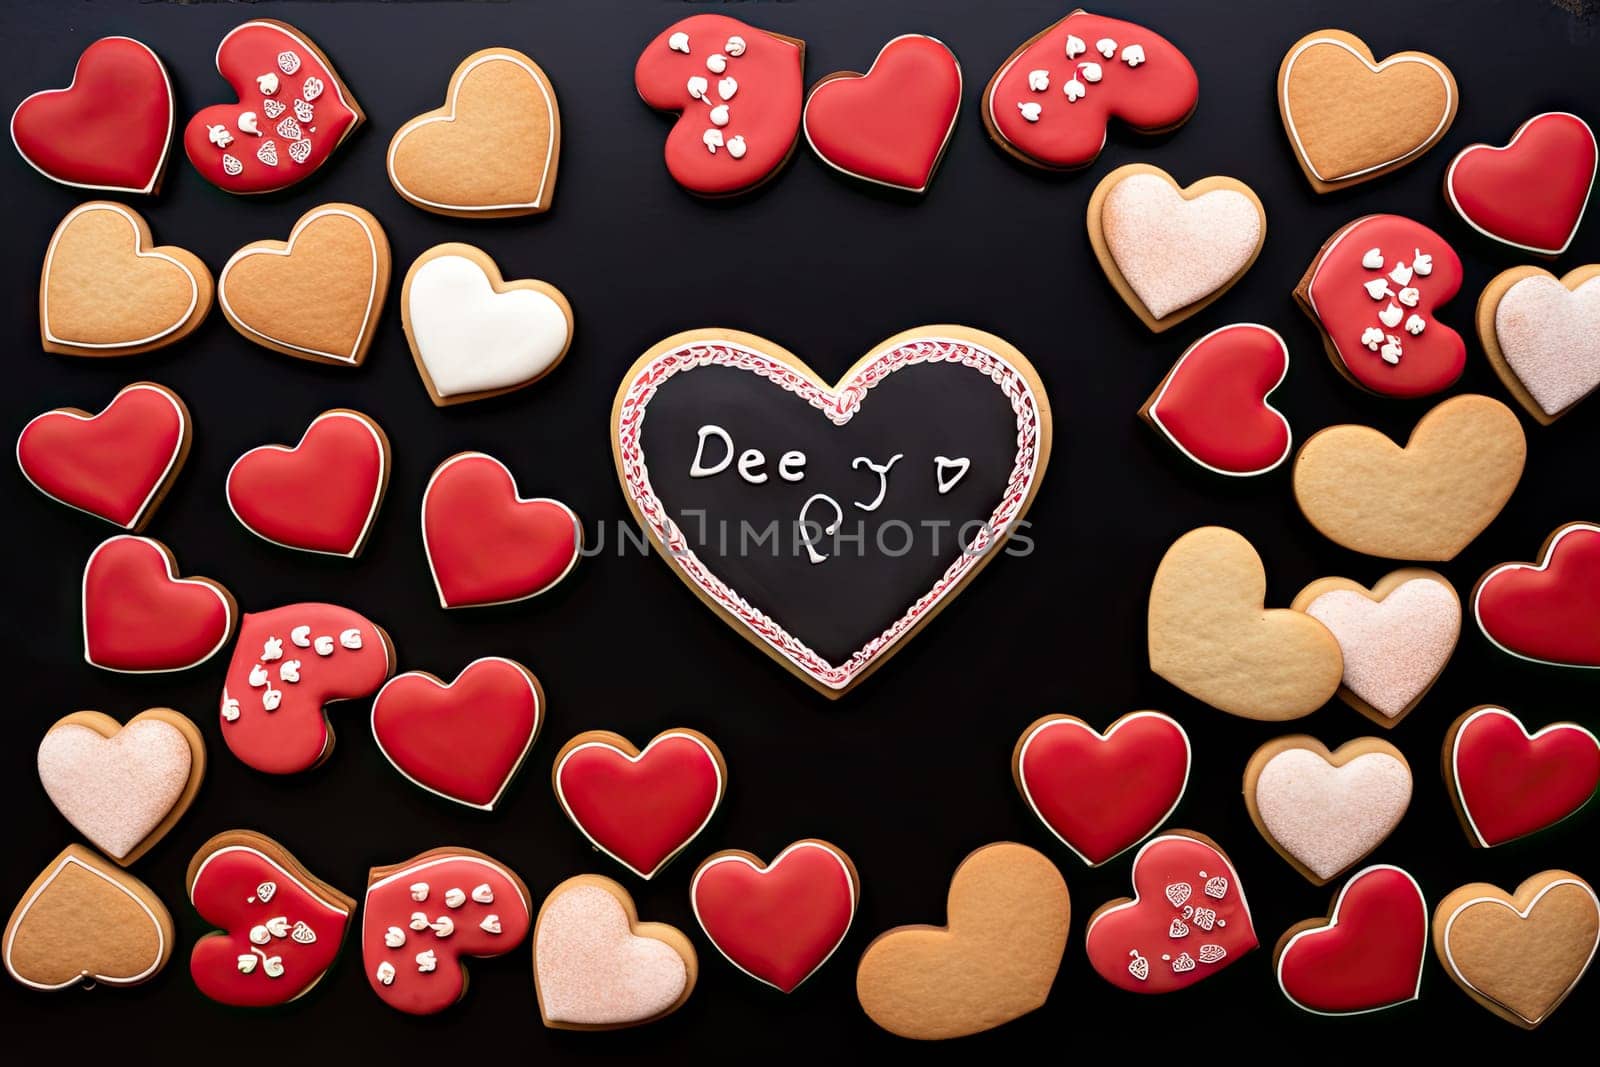 A Chalkboard Message on a Heart-Shaped Cookie Created With Generative AI Technology